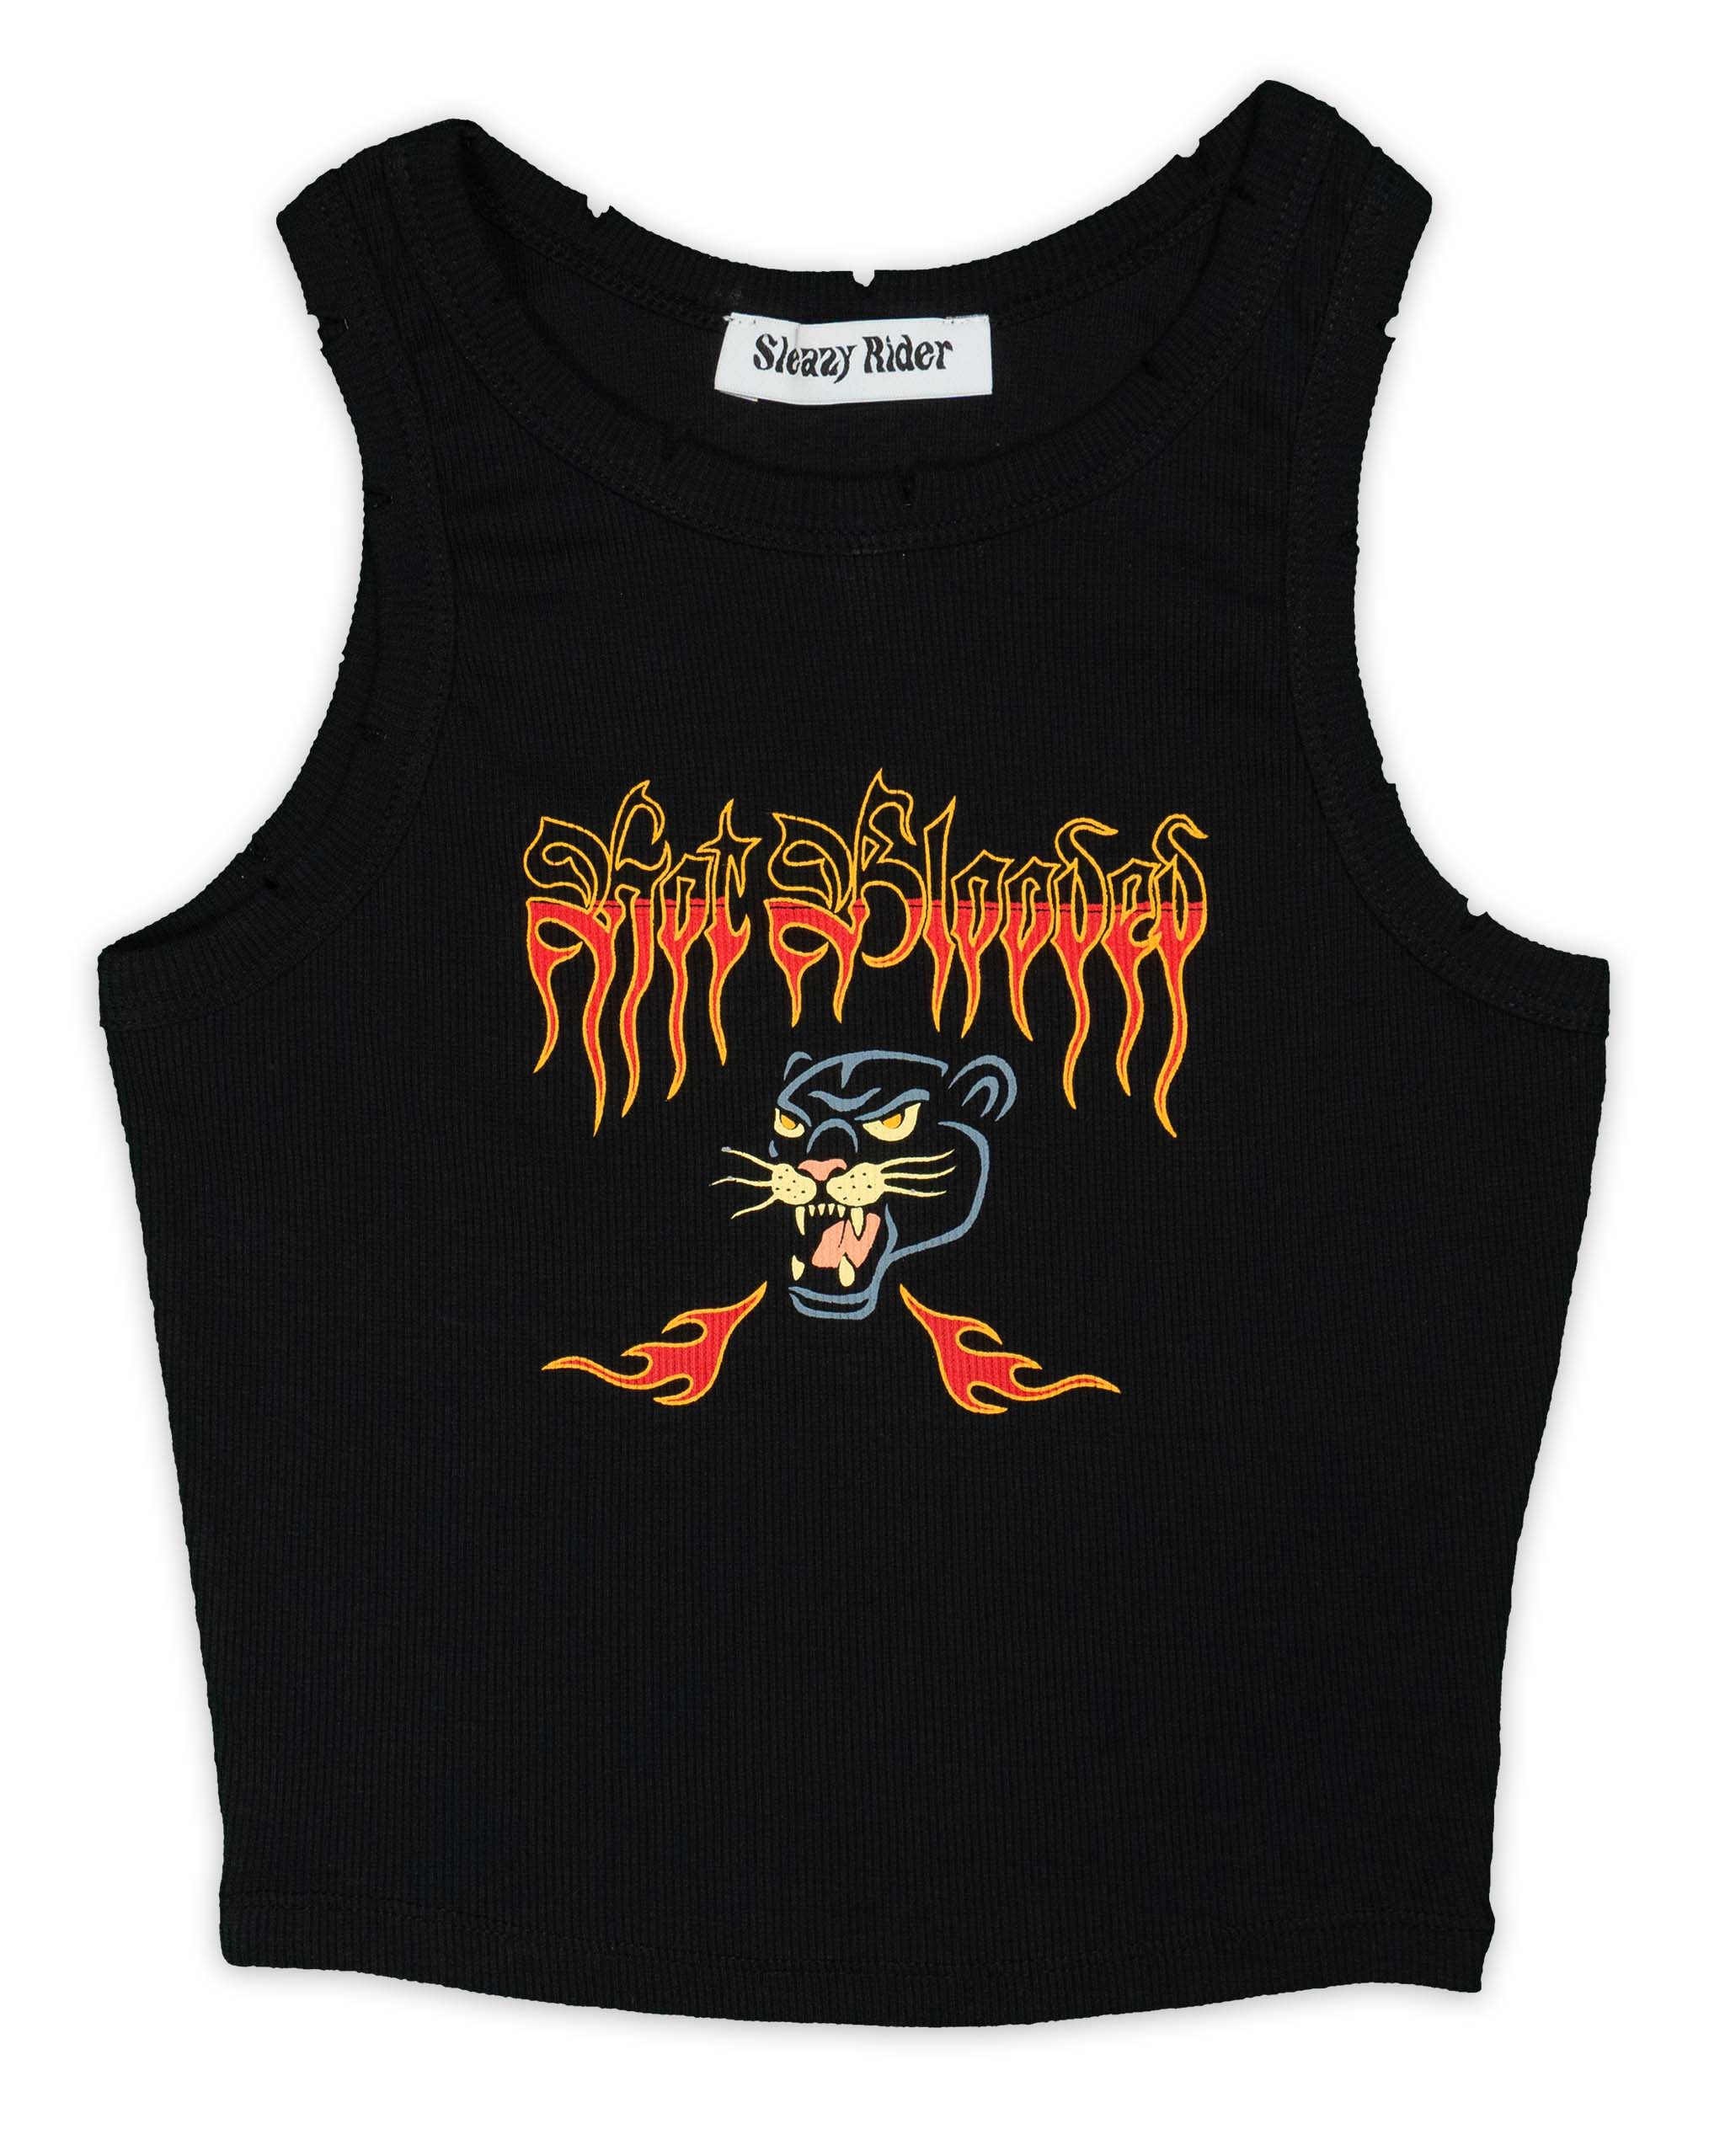 Hot Blooded Panther tank top by Sleazy Rider